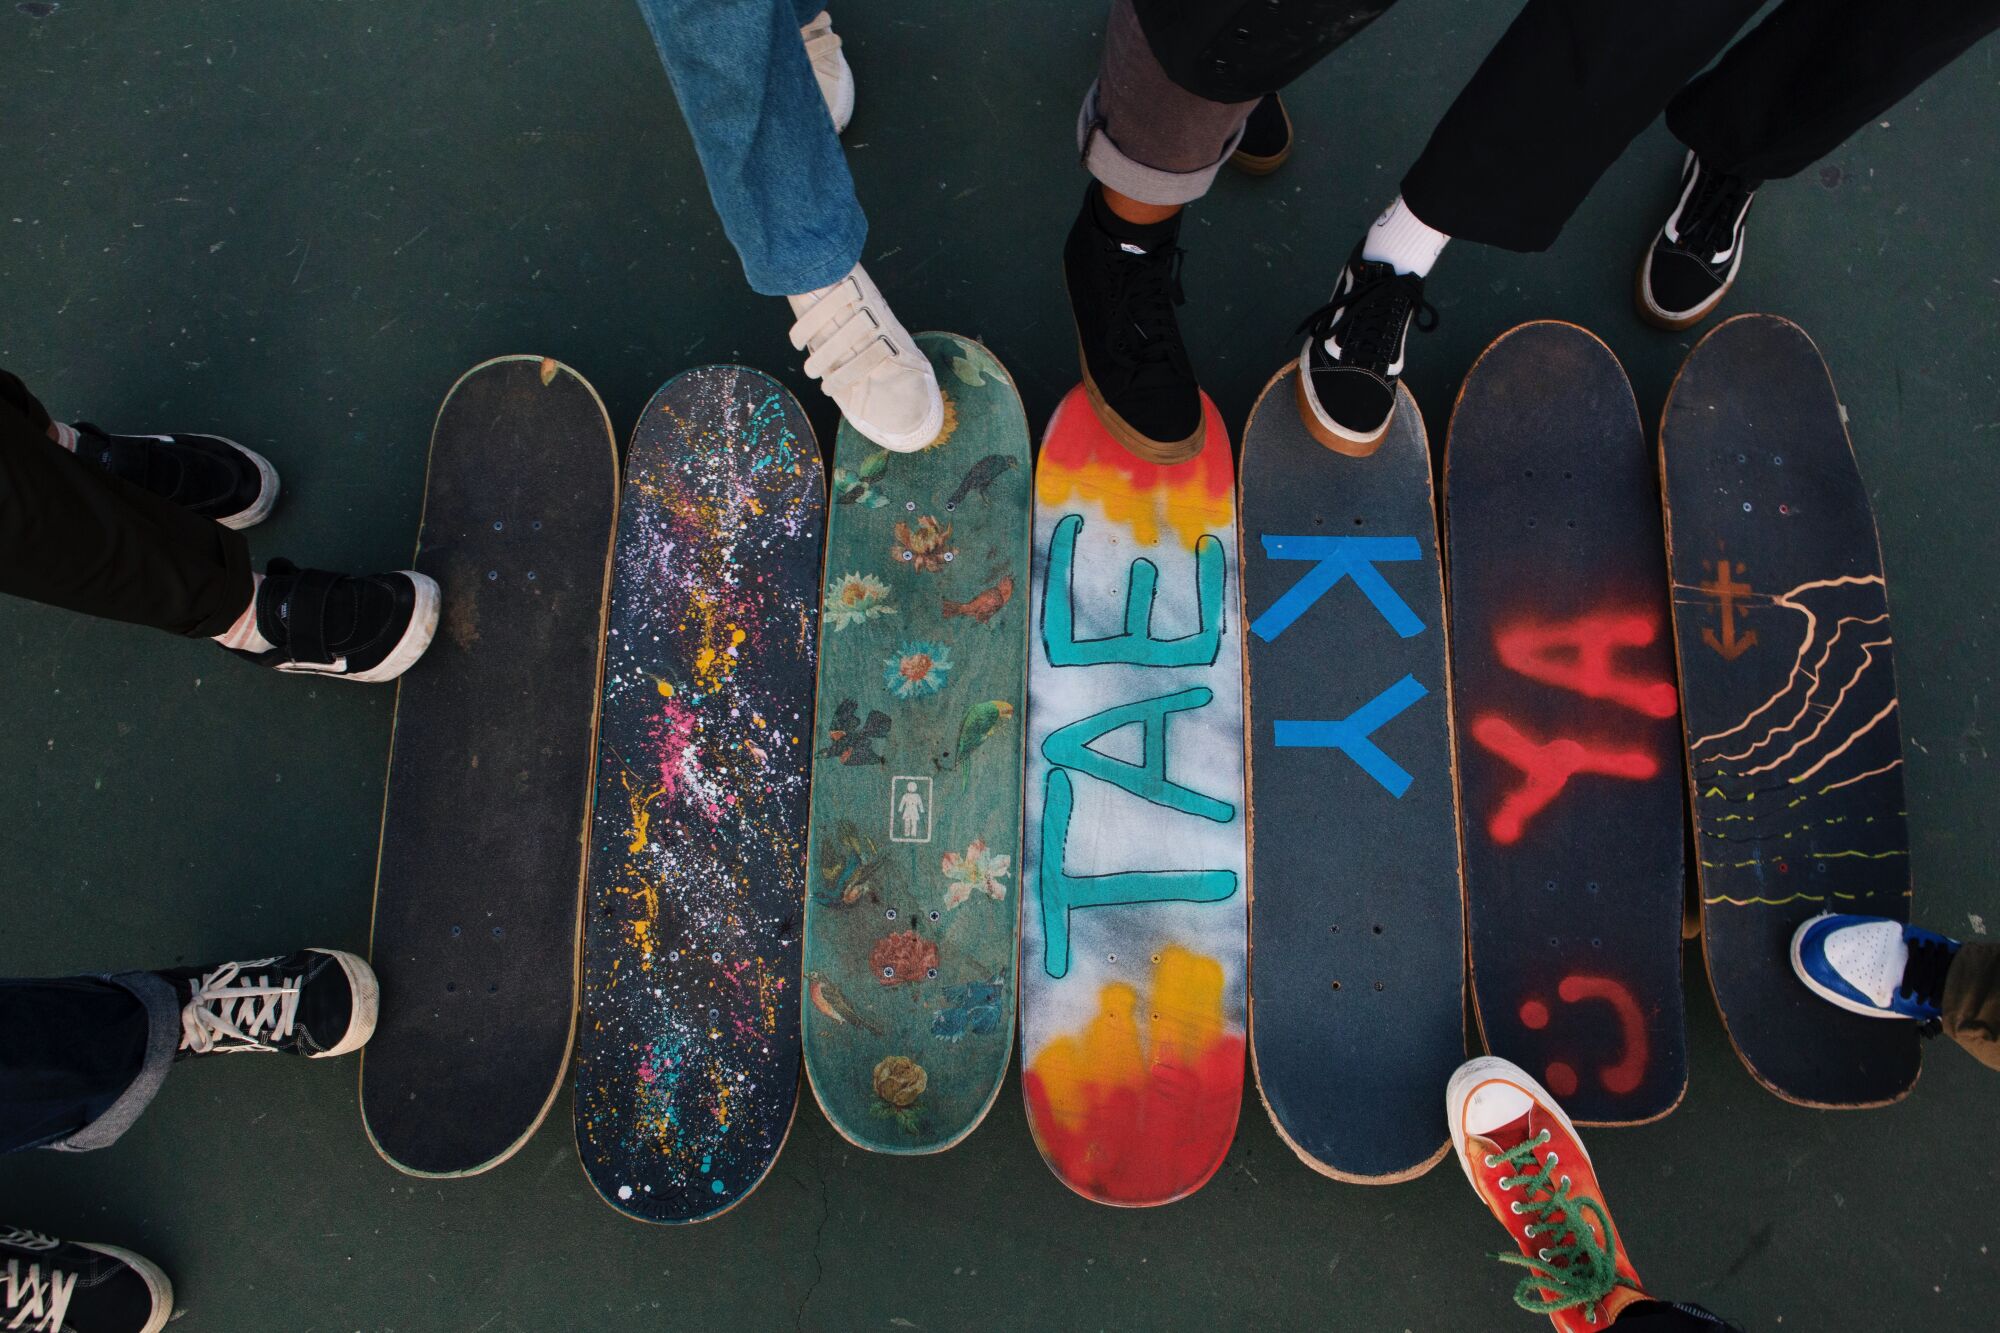 Boos Cruise members line up their skateboards